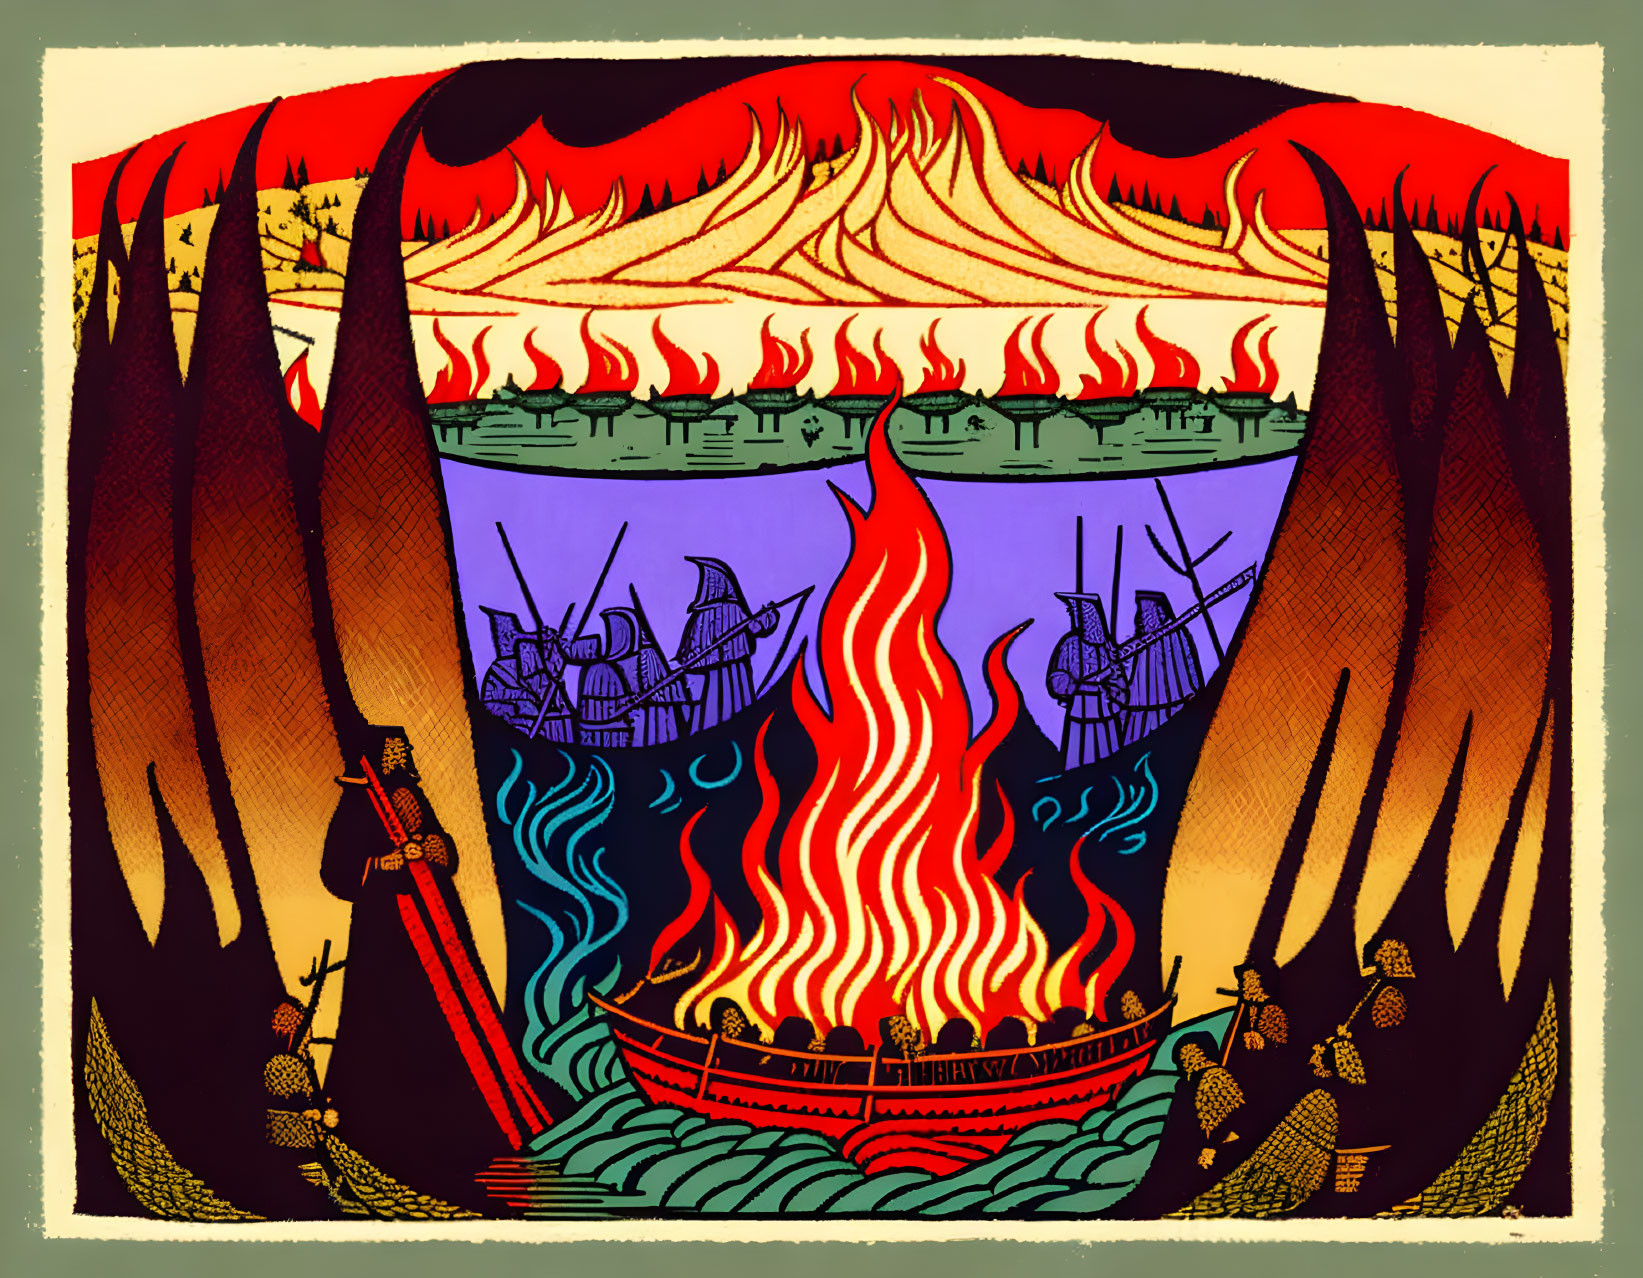 Illustration of Norse funeral with flaming boat, warriors, and weapons in fiery setting